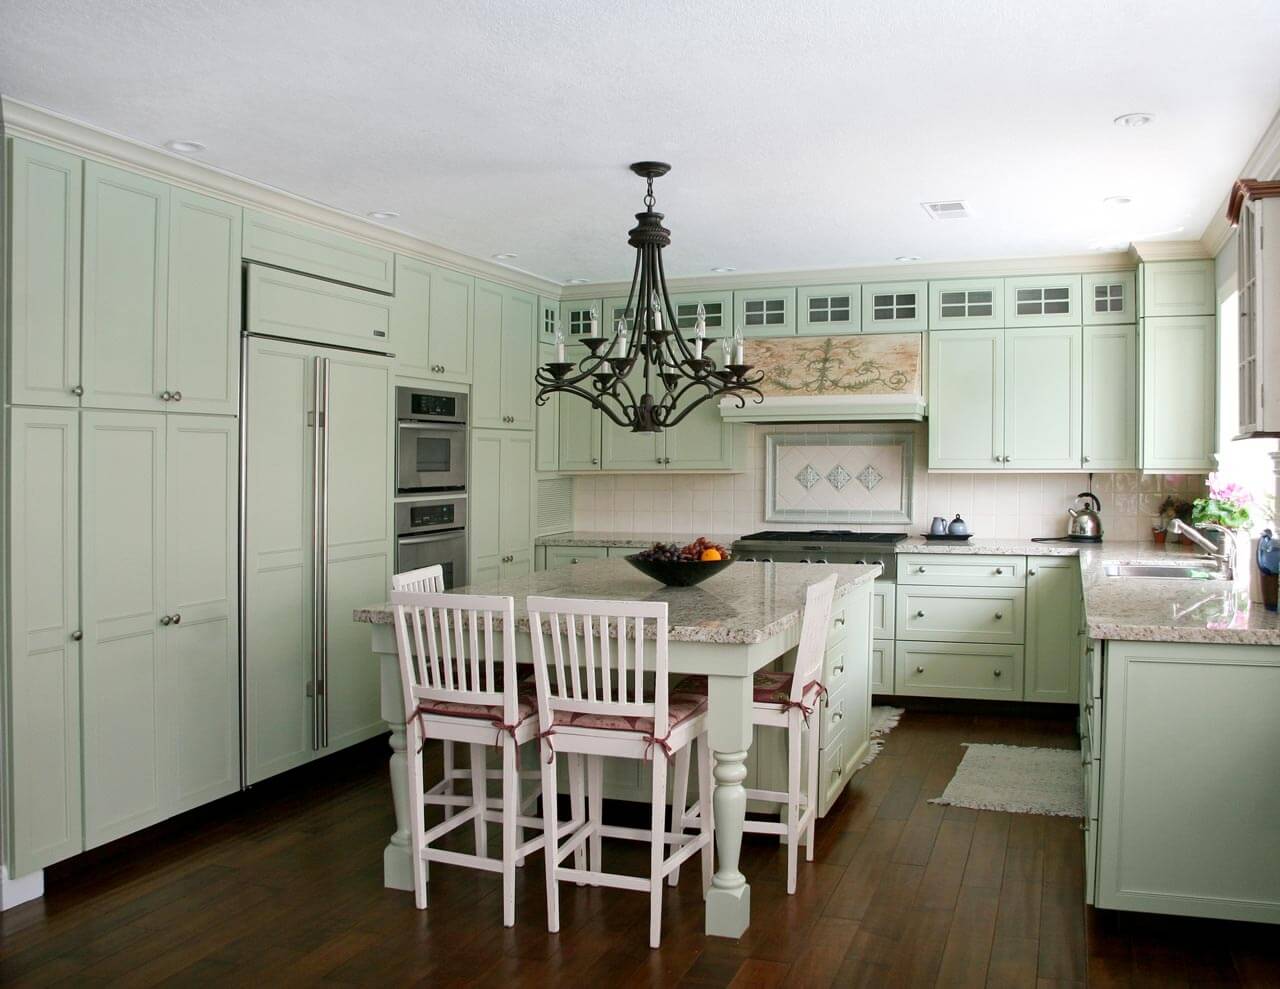 A u-shaped country-style kitchen with mint-painted cabinets.